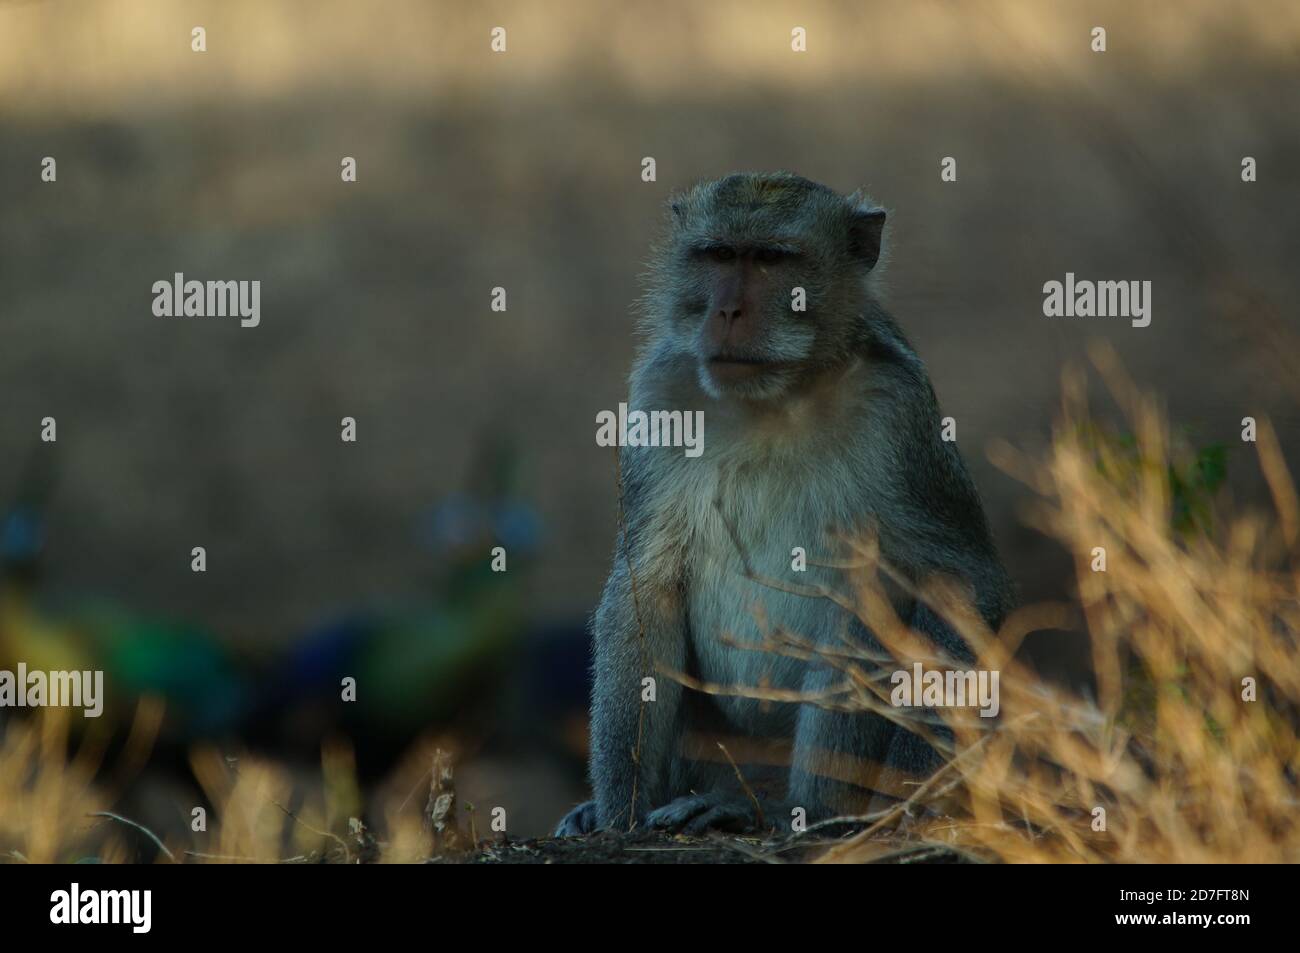 long tailed macaque in the forest, monkey in Baluran National park, Java, Indonesia Stock Photo